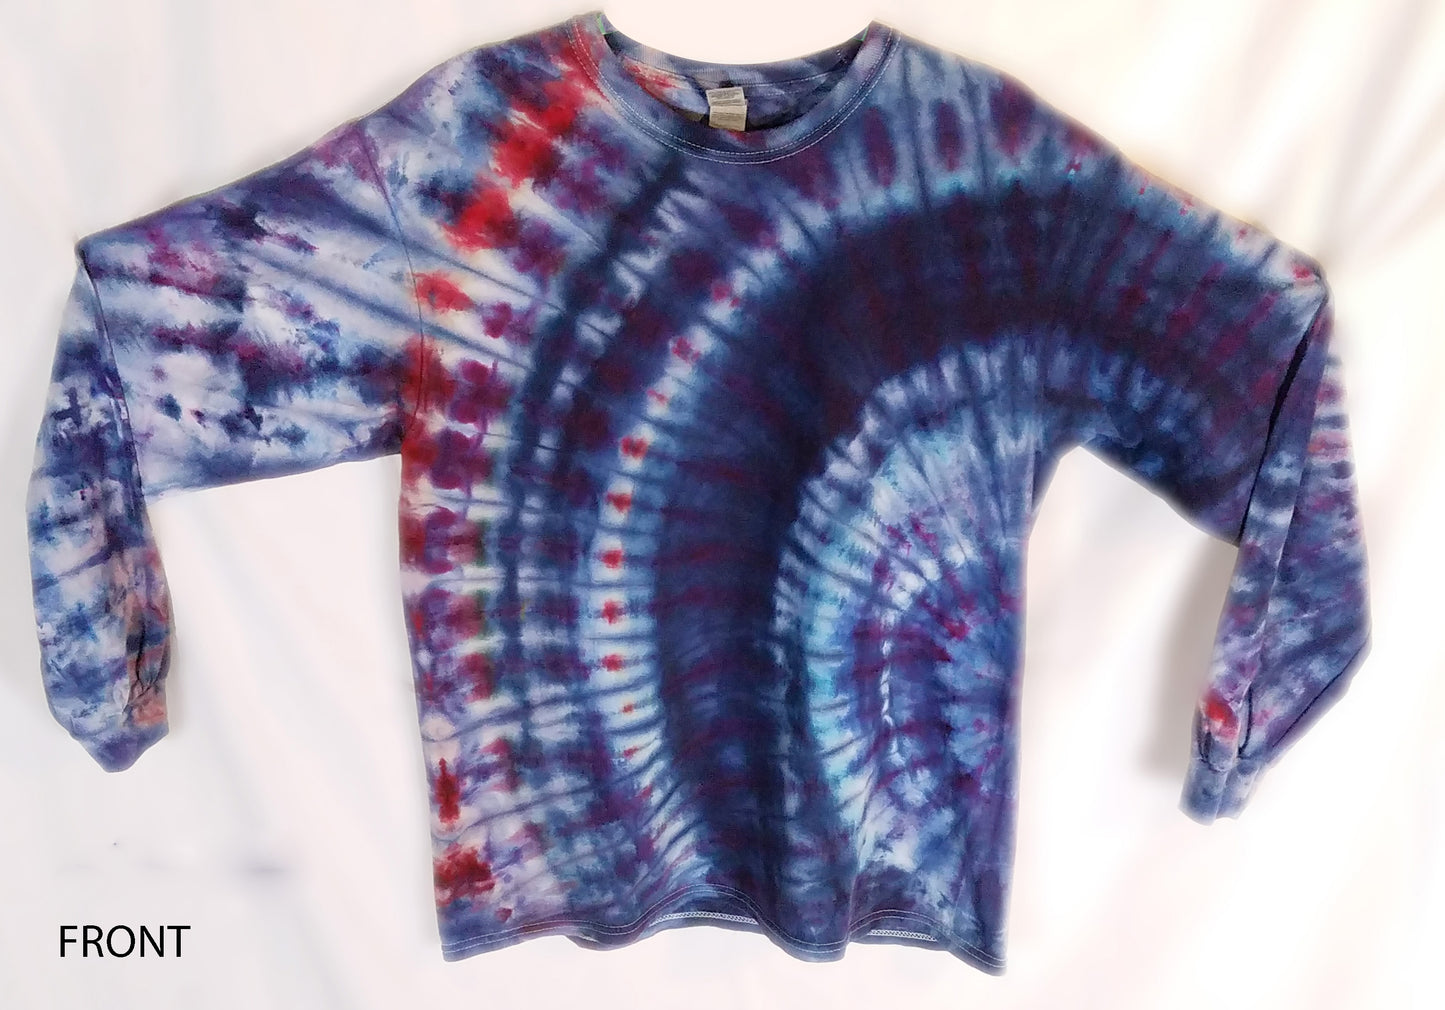 SOLD! Large Long Sleeve Tie Dyed Mostly Dark Blue Shirt